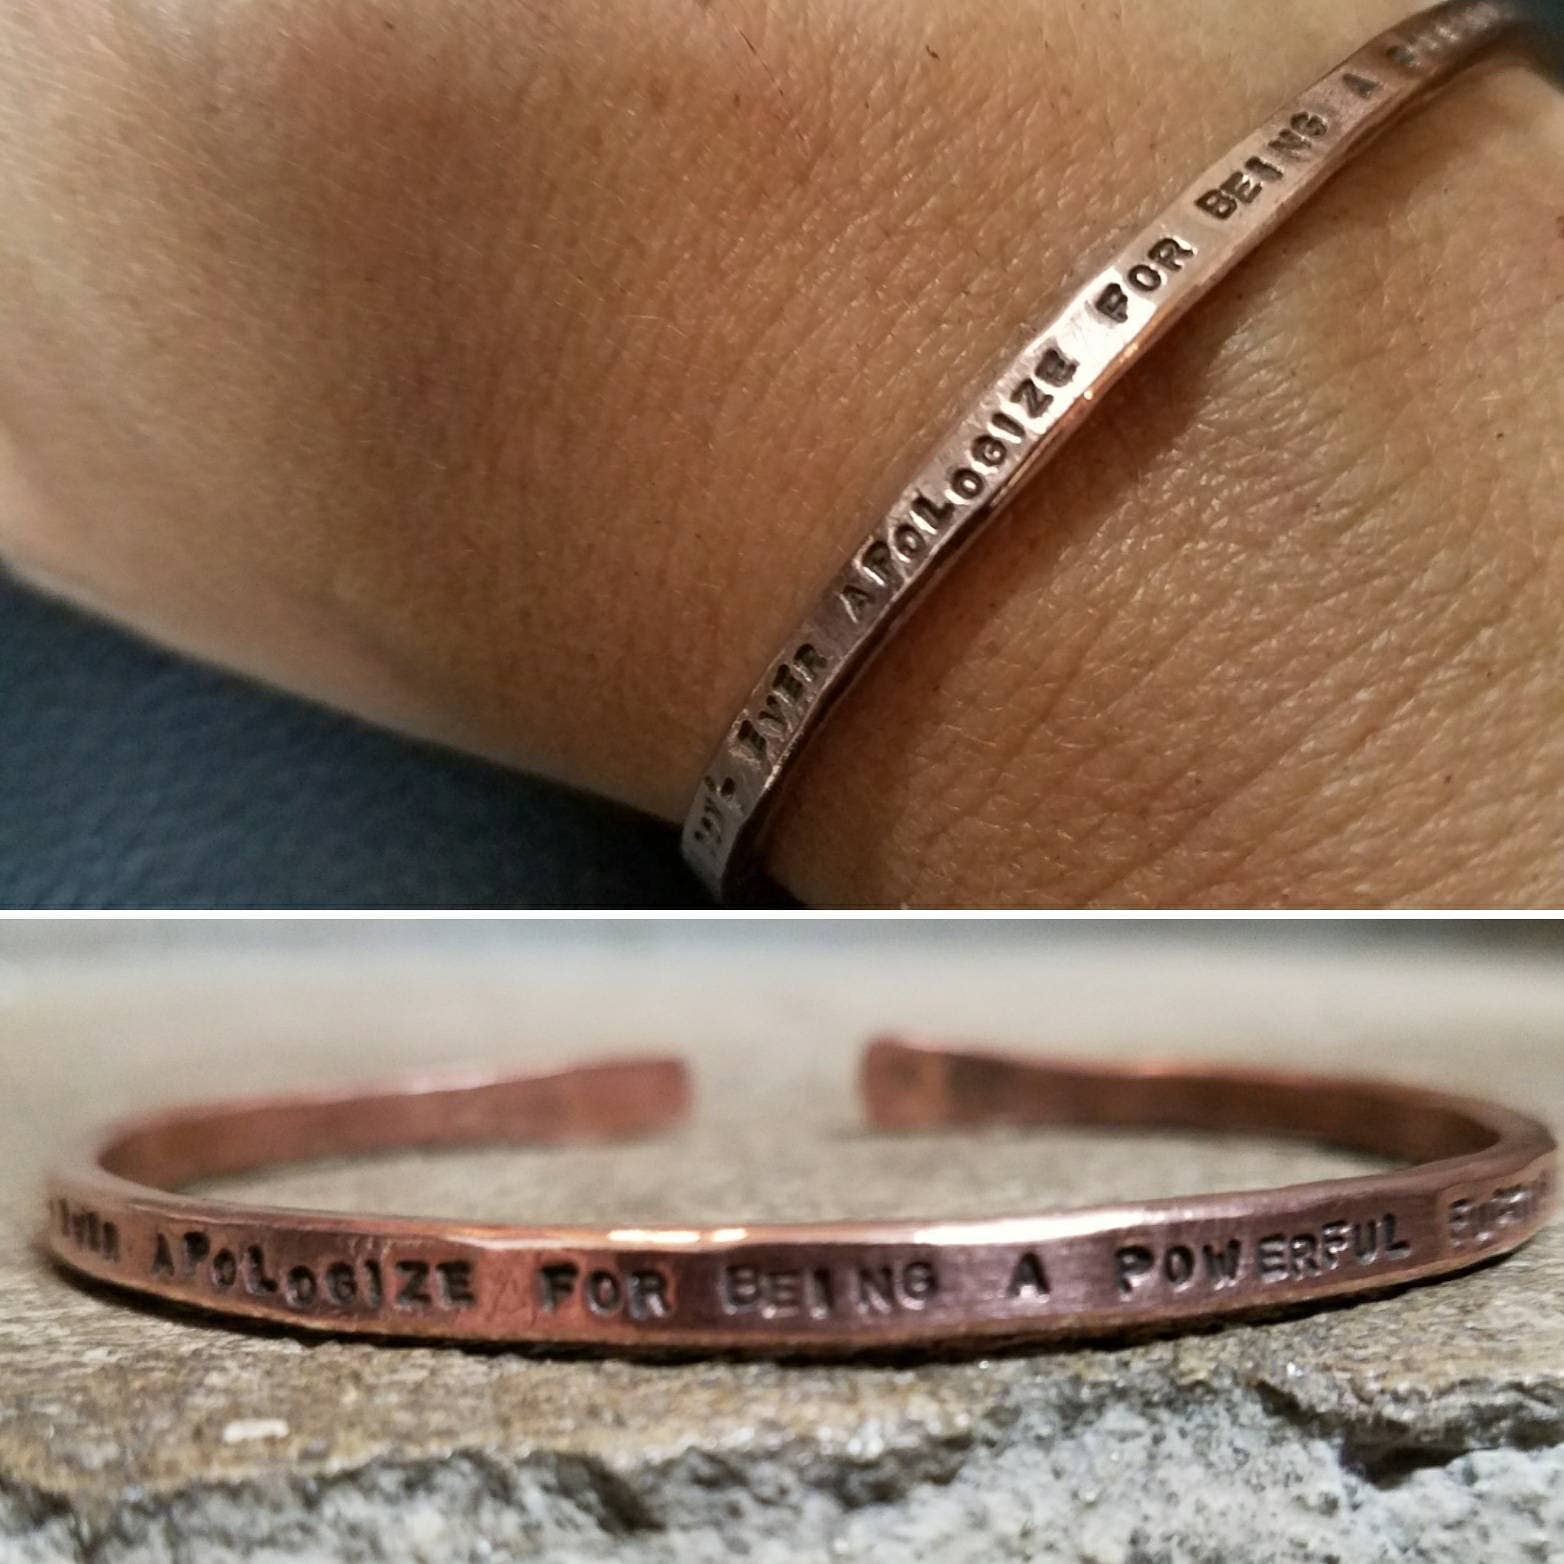 Never Apologize For Being A Powerful Fucking Woman - Copper Or Brass Gold Cuss Cuff. Swearing, Adult, Stackable Bangle Bracelet - Spiral Circle